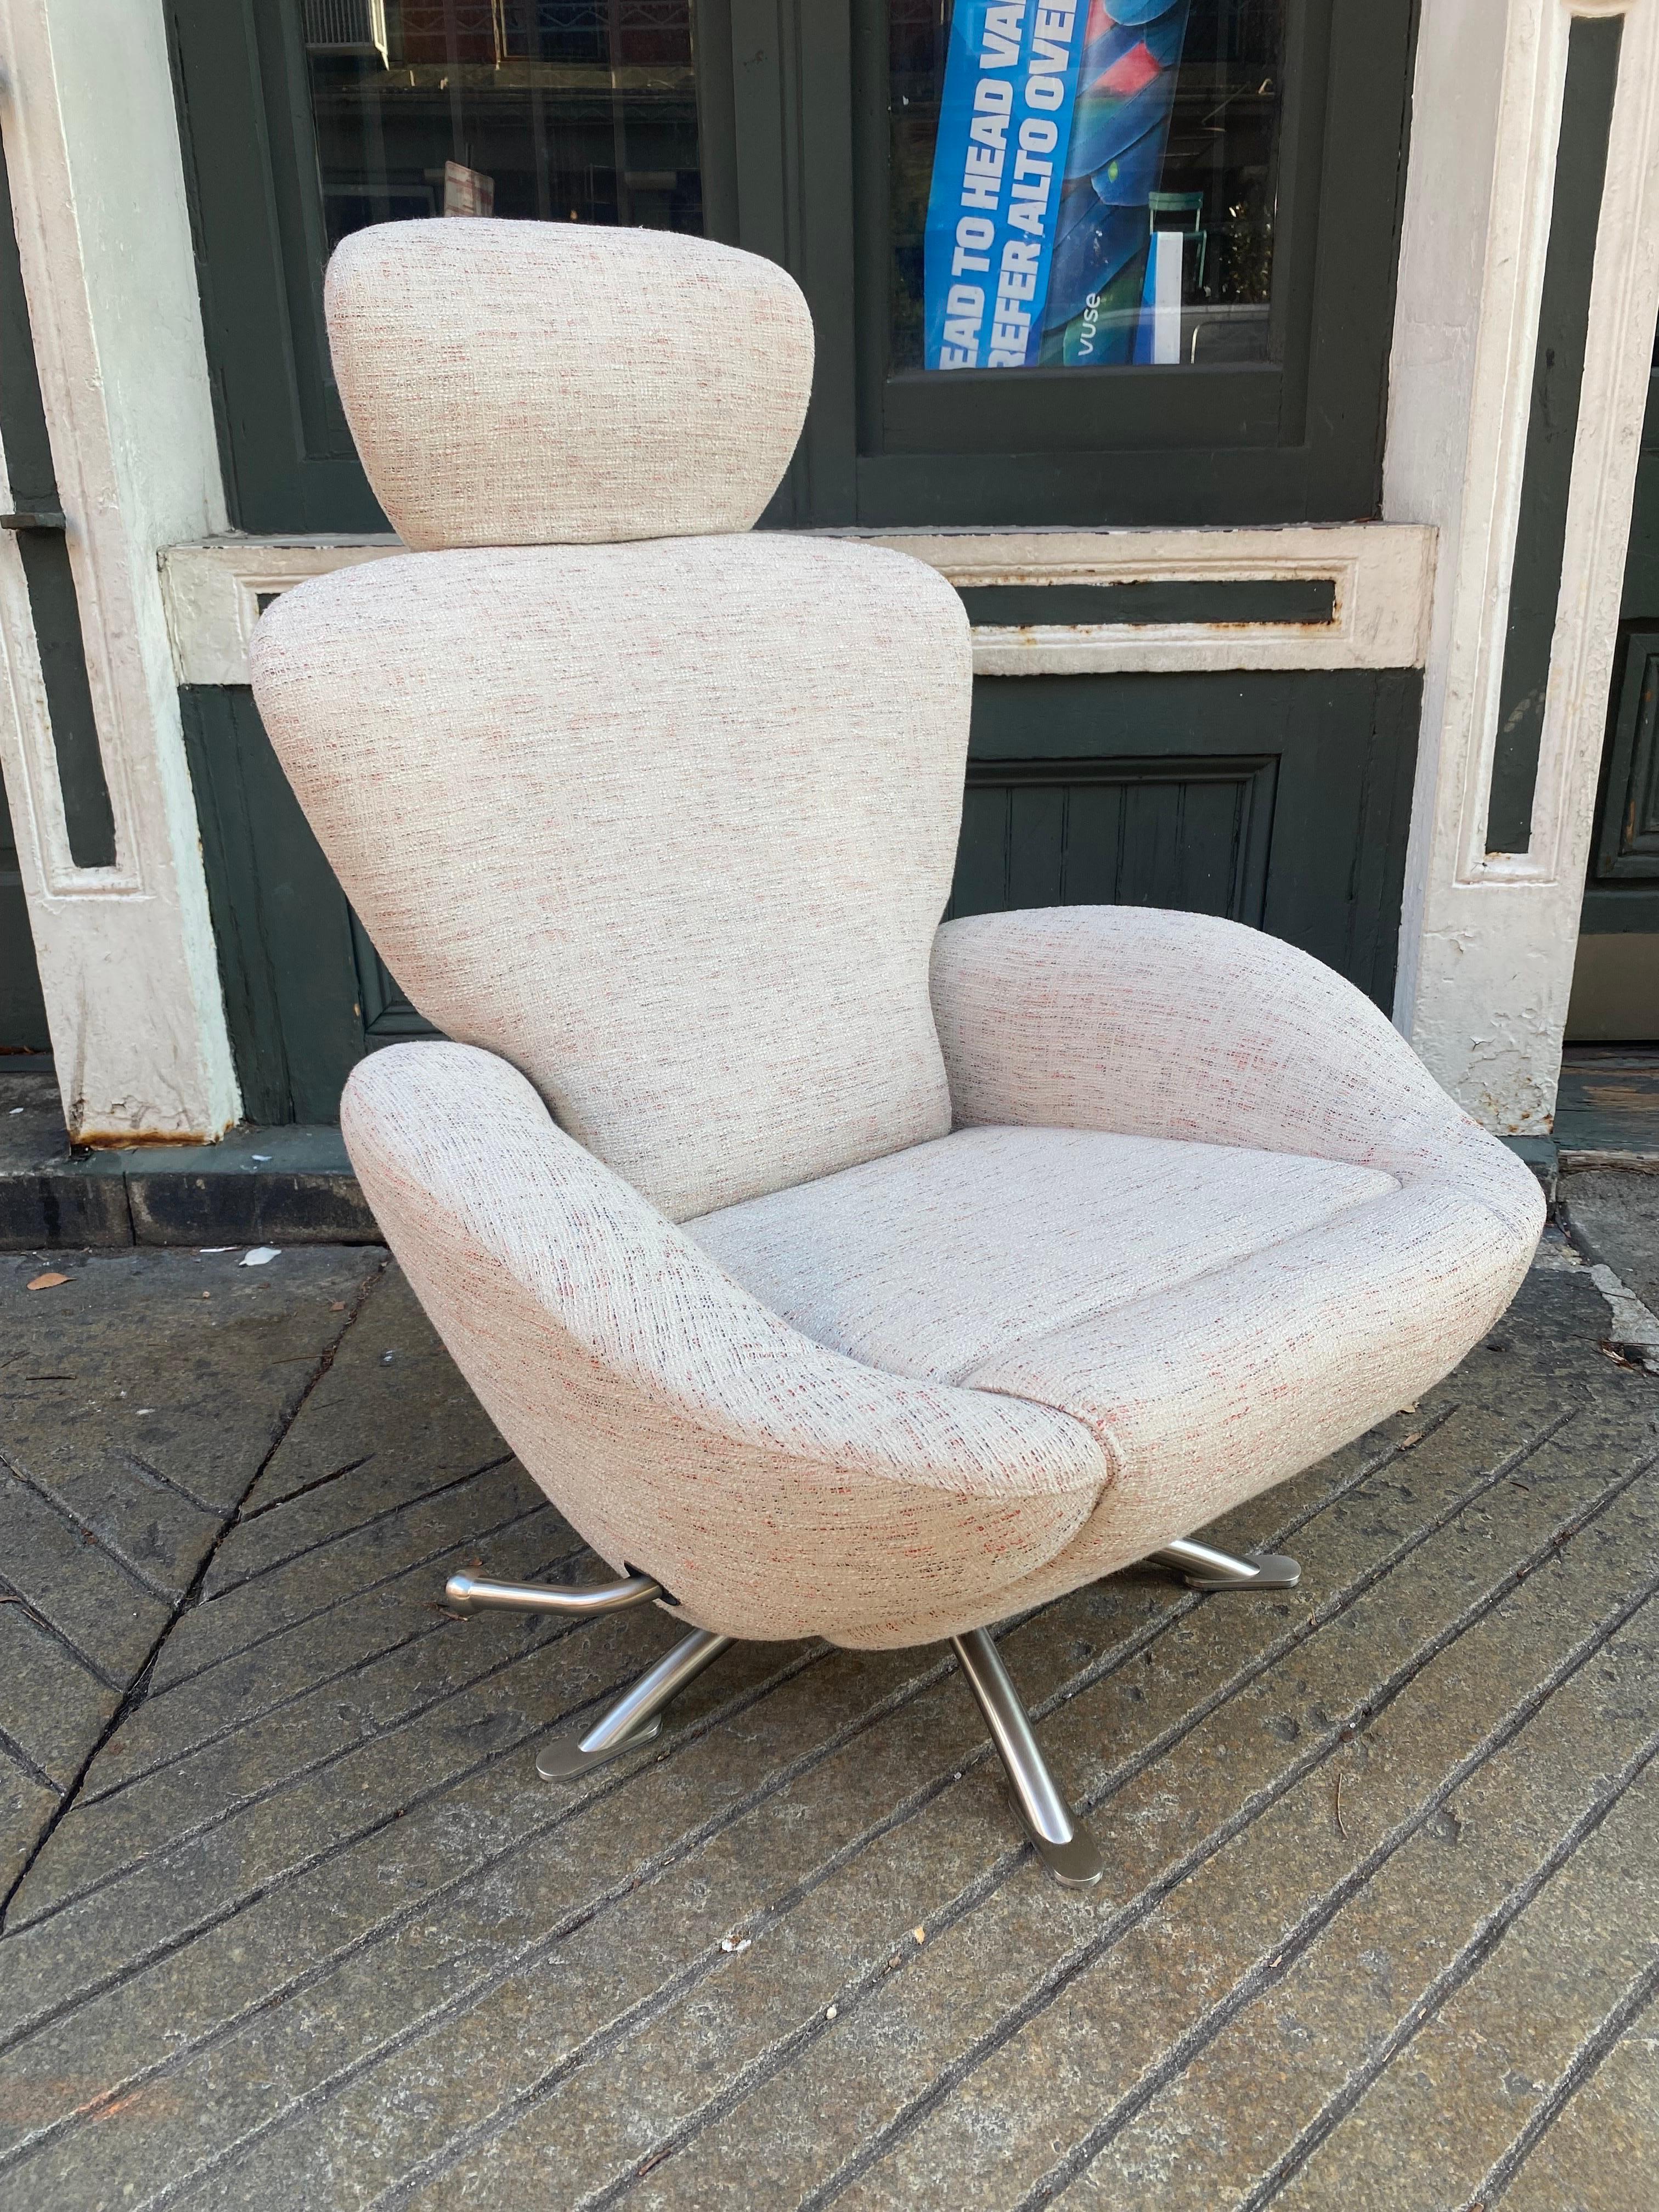 Toshiyuki Kita for Cassina Dodo Chair.  This chair is about 10 years old and still presents like new!  Very Clean Example from a Rittenhouse Square Apartment.  Fabric is creamy with flecks of white, red and black.  Chair does everythng!  Reclines in